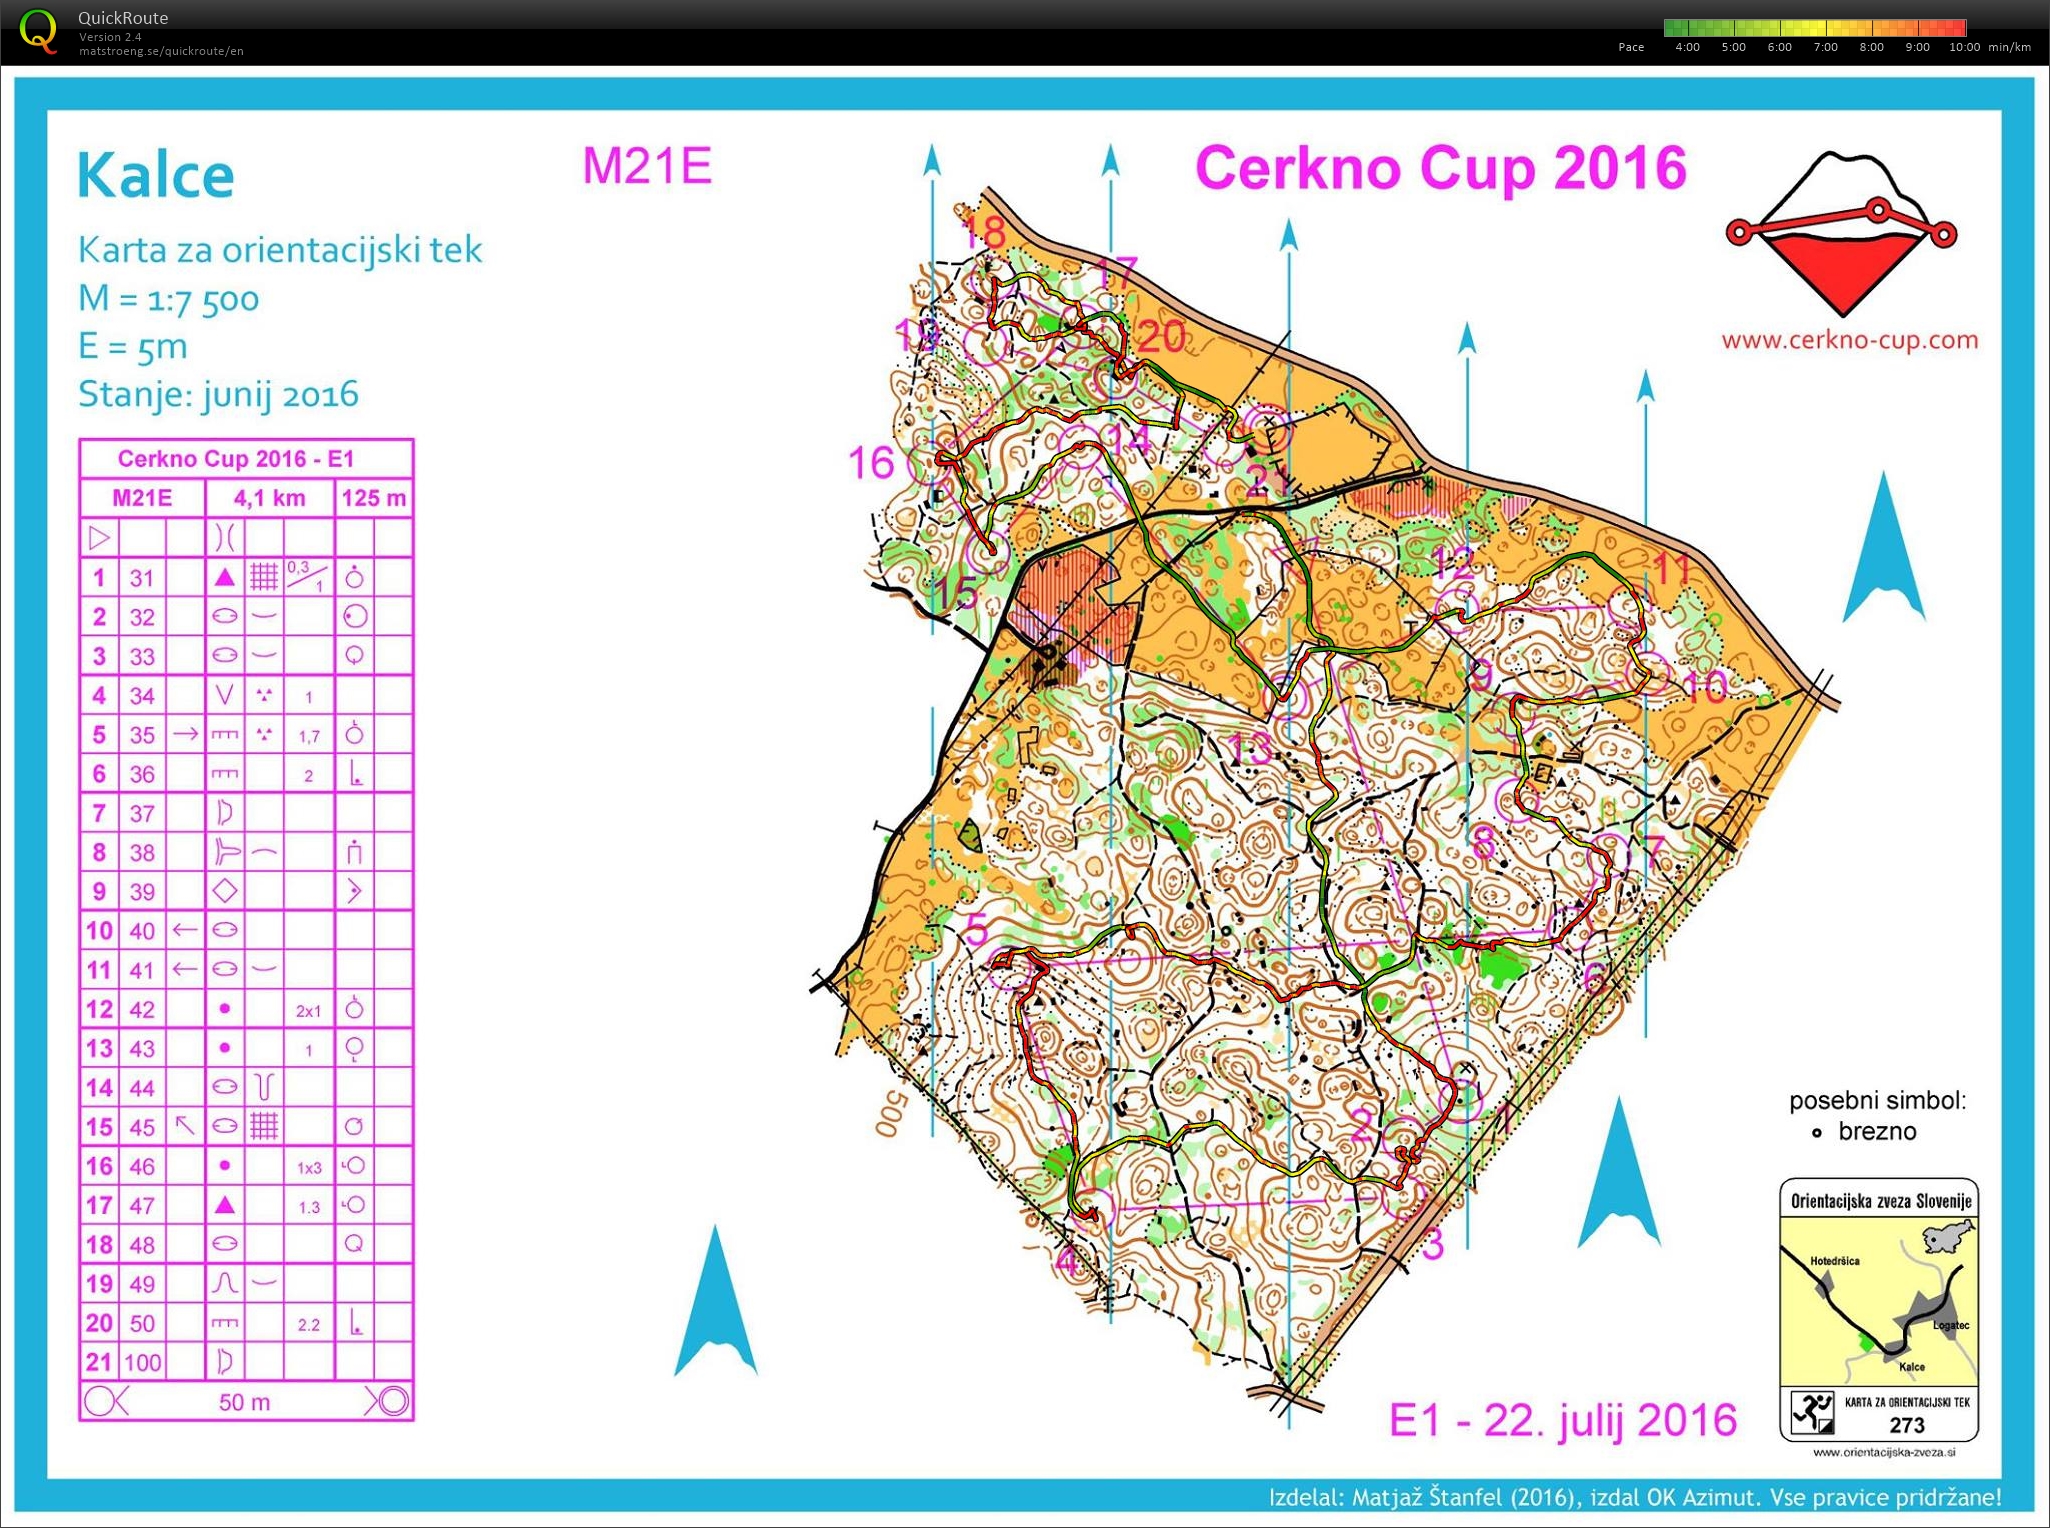 Cerkno Cup stage 1 (22/07/2016)